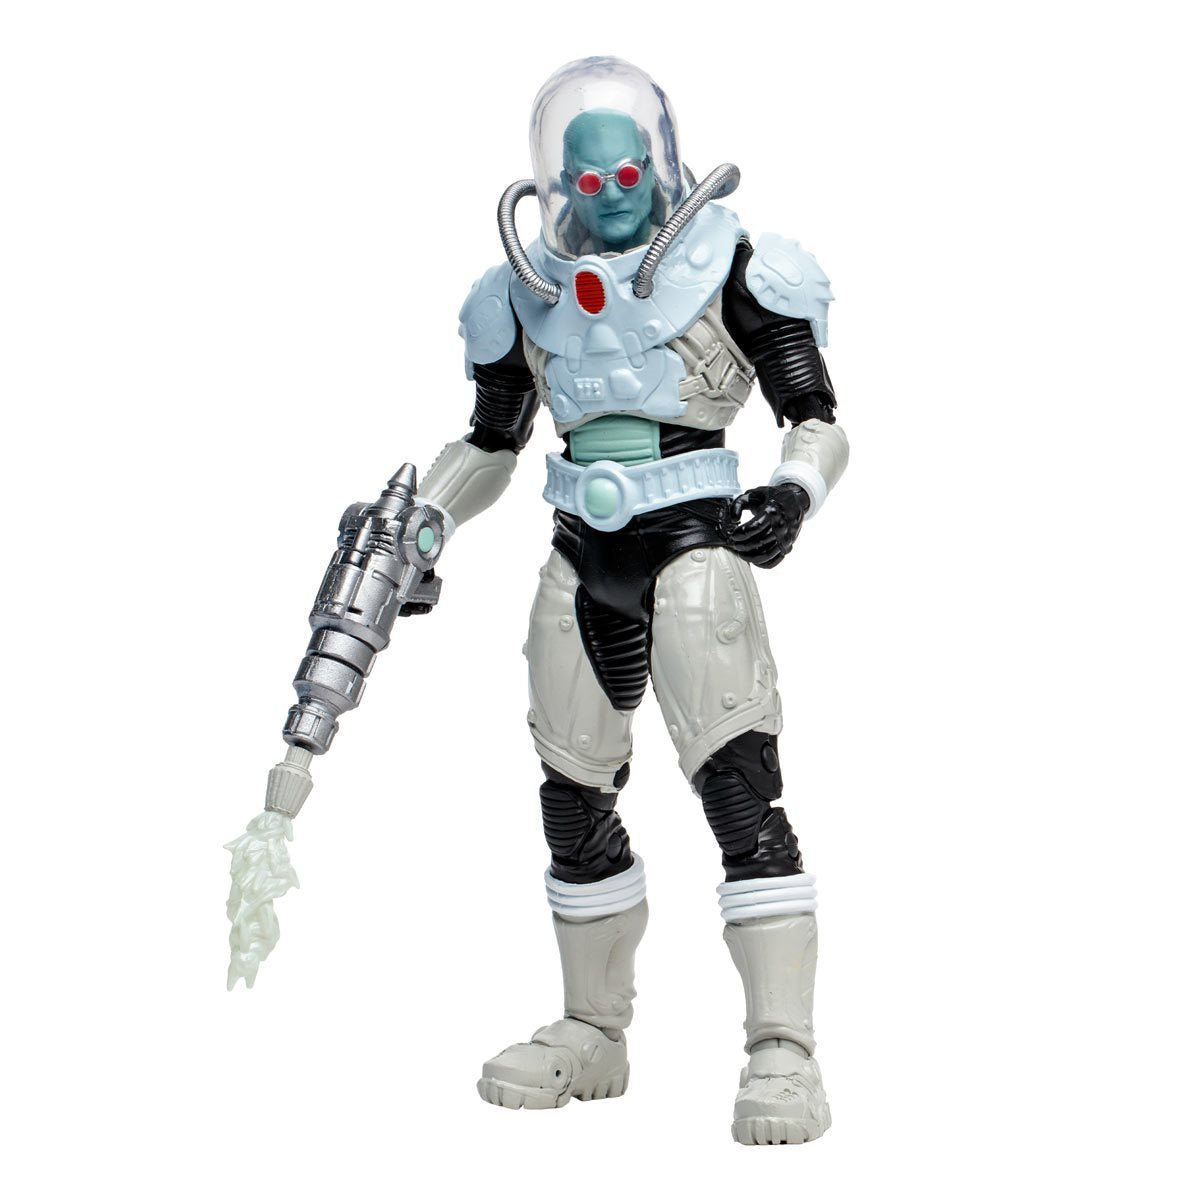 DC Multiverse Mister Freeze (Victor Fries)